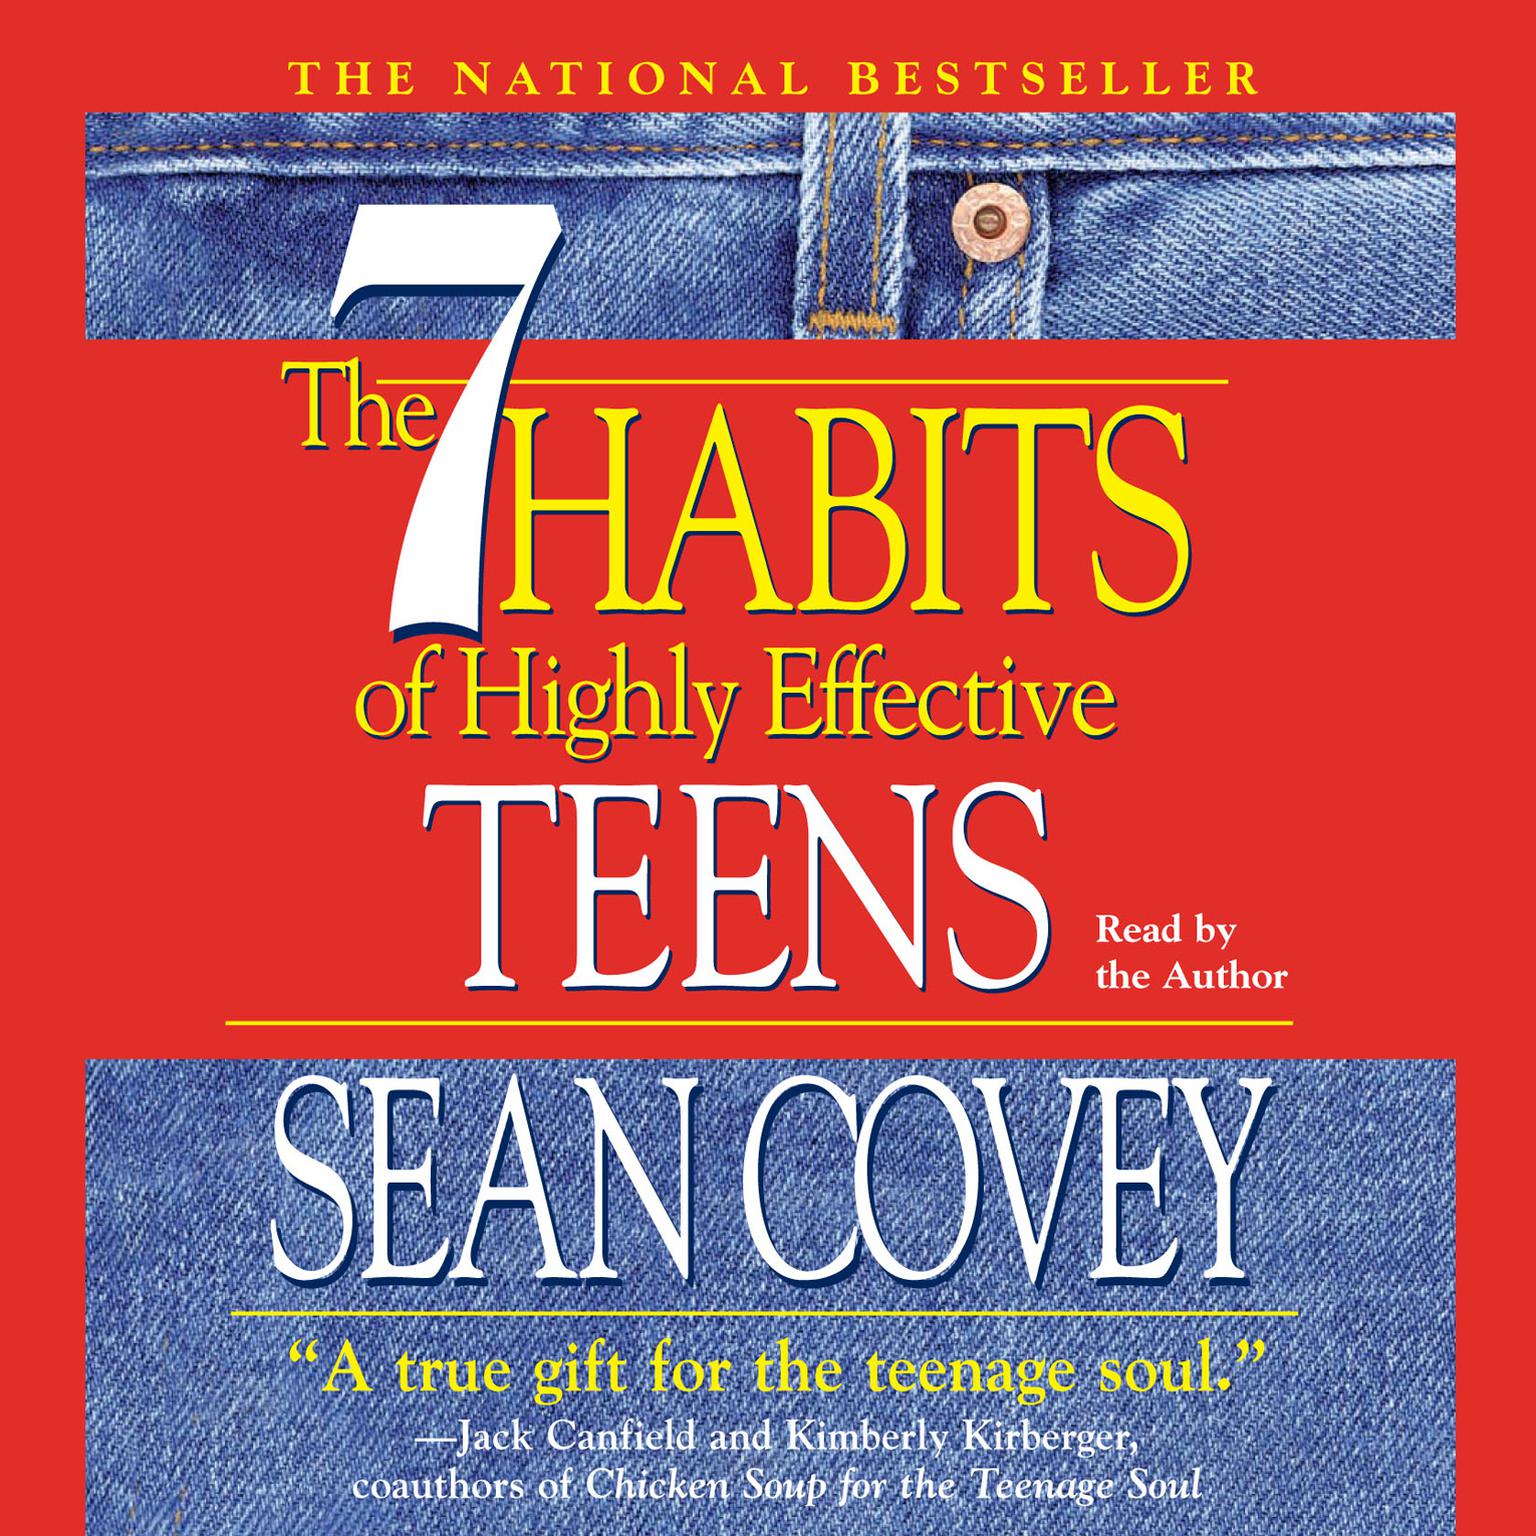 The 7 Habits of Highly Effective Teens: The Ultimate Teenage Success Guide Audiobook, by Sean Covey